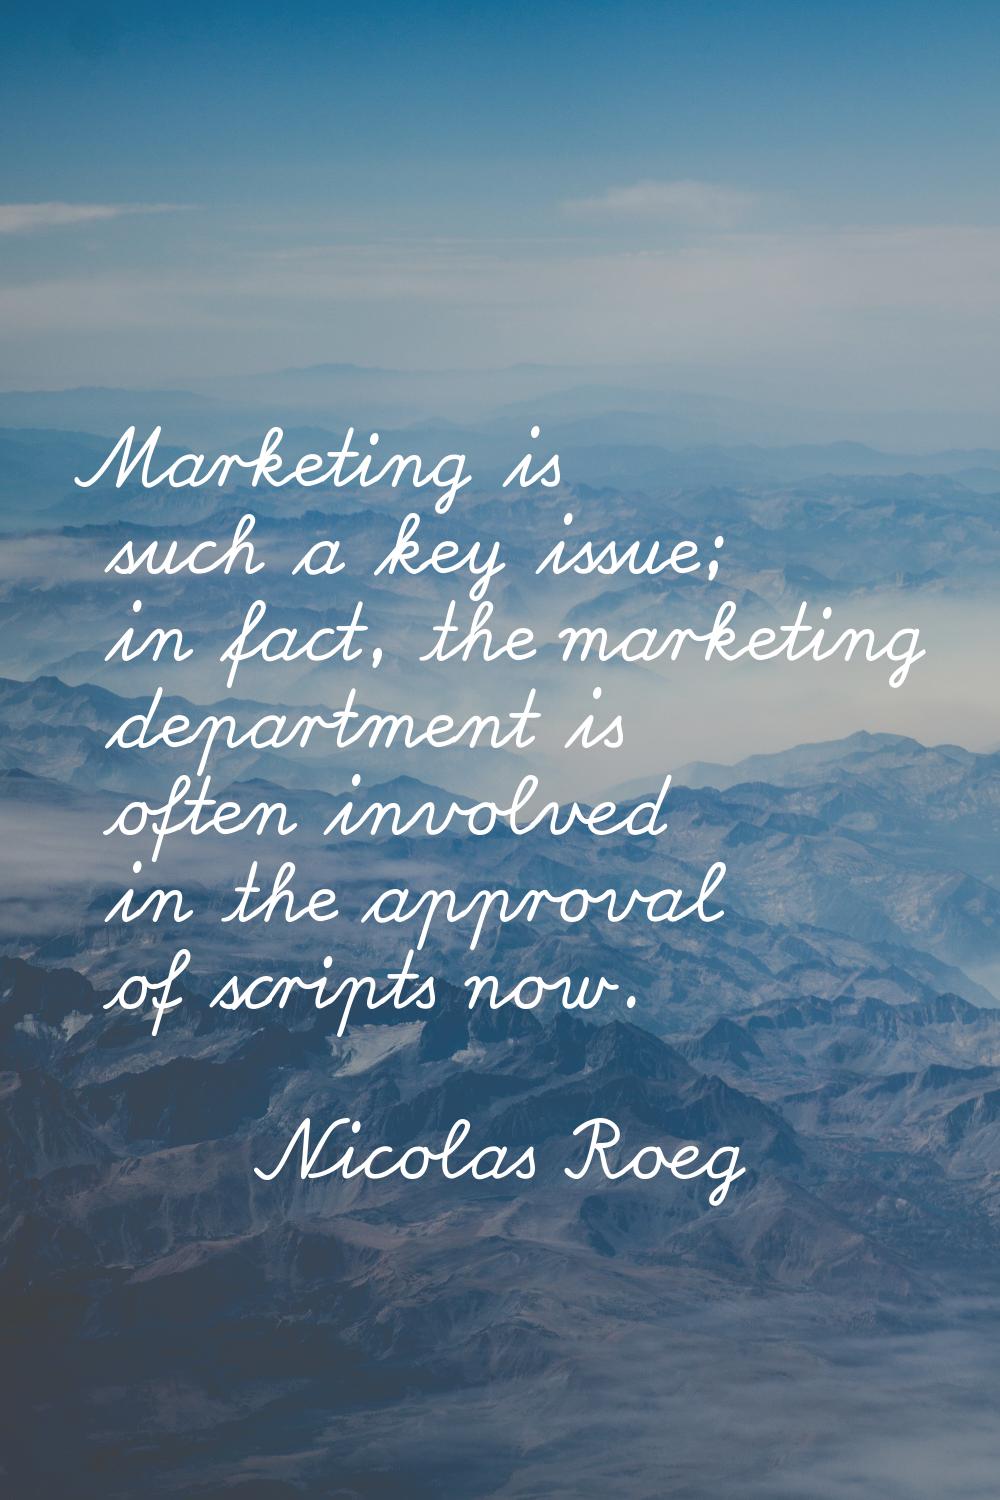 Marketing is such a key issue; in fact, the marketing department is often involved in the approval 